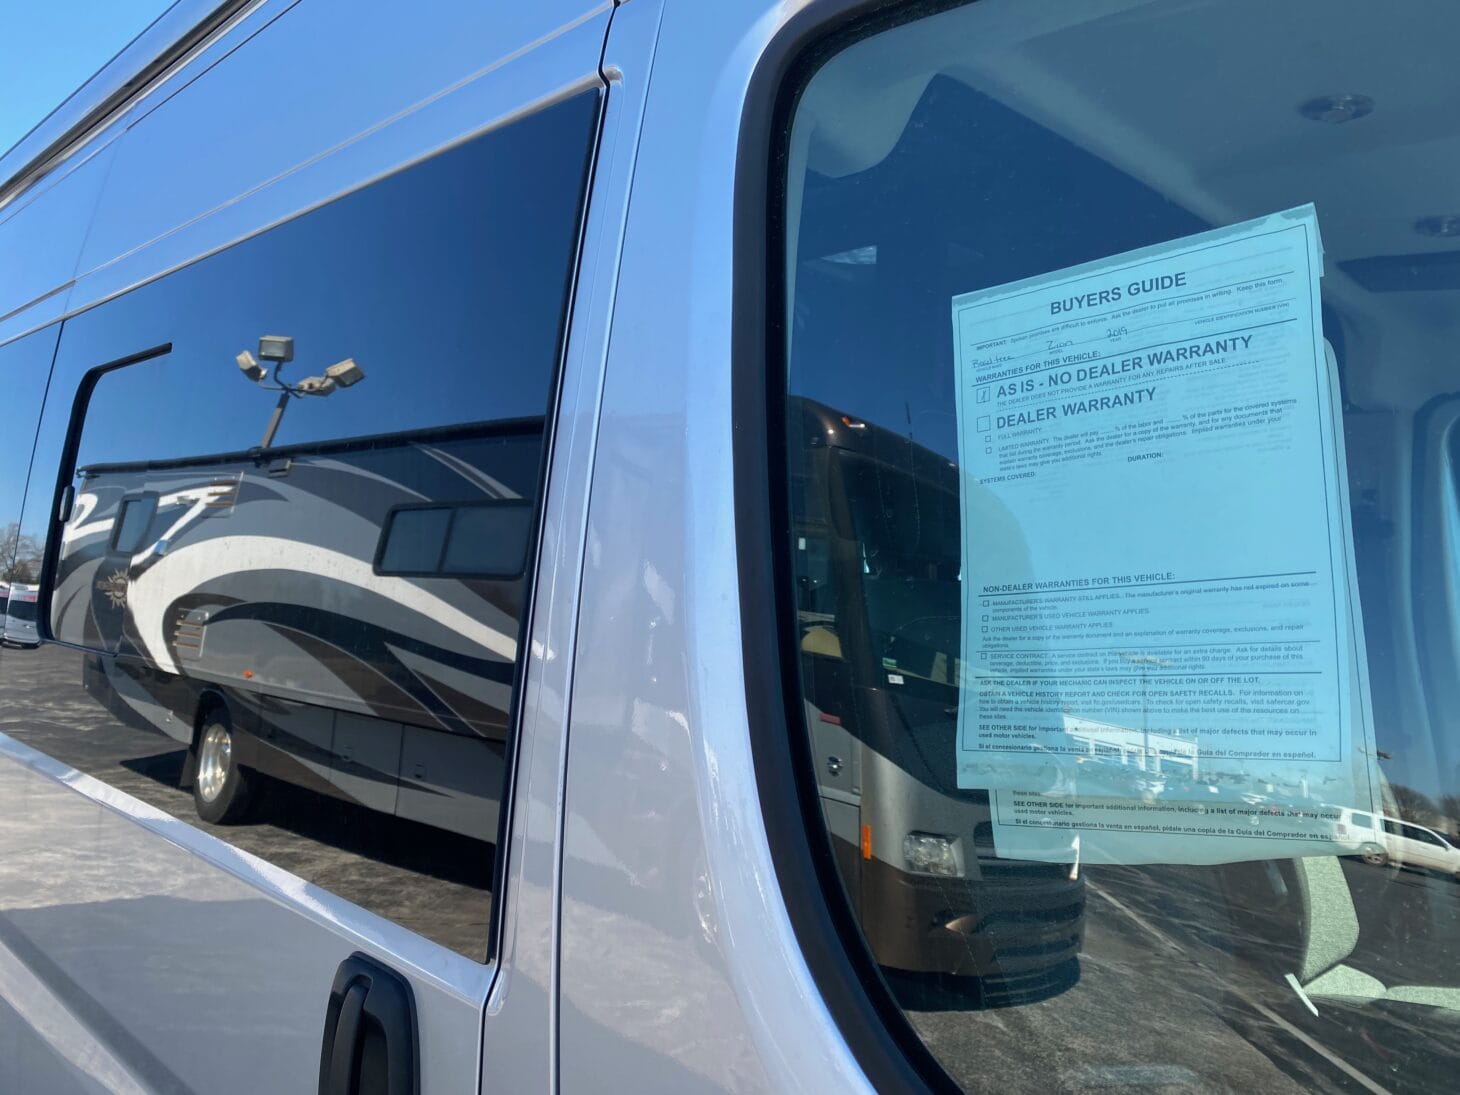 Dealer warranty terms posted on an RV window at a dealership.